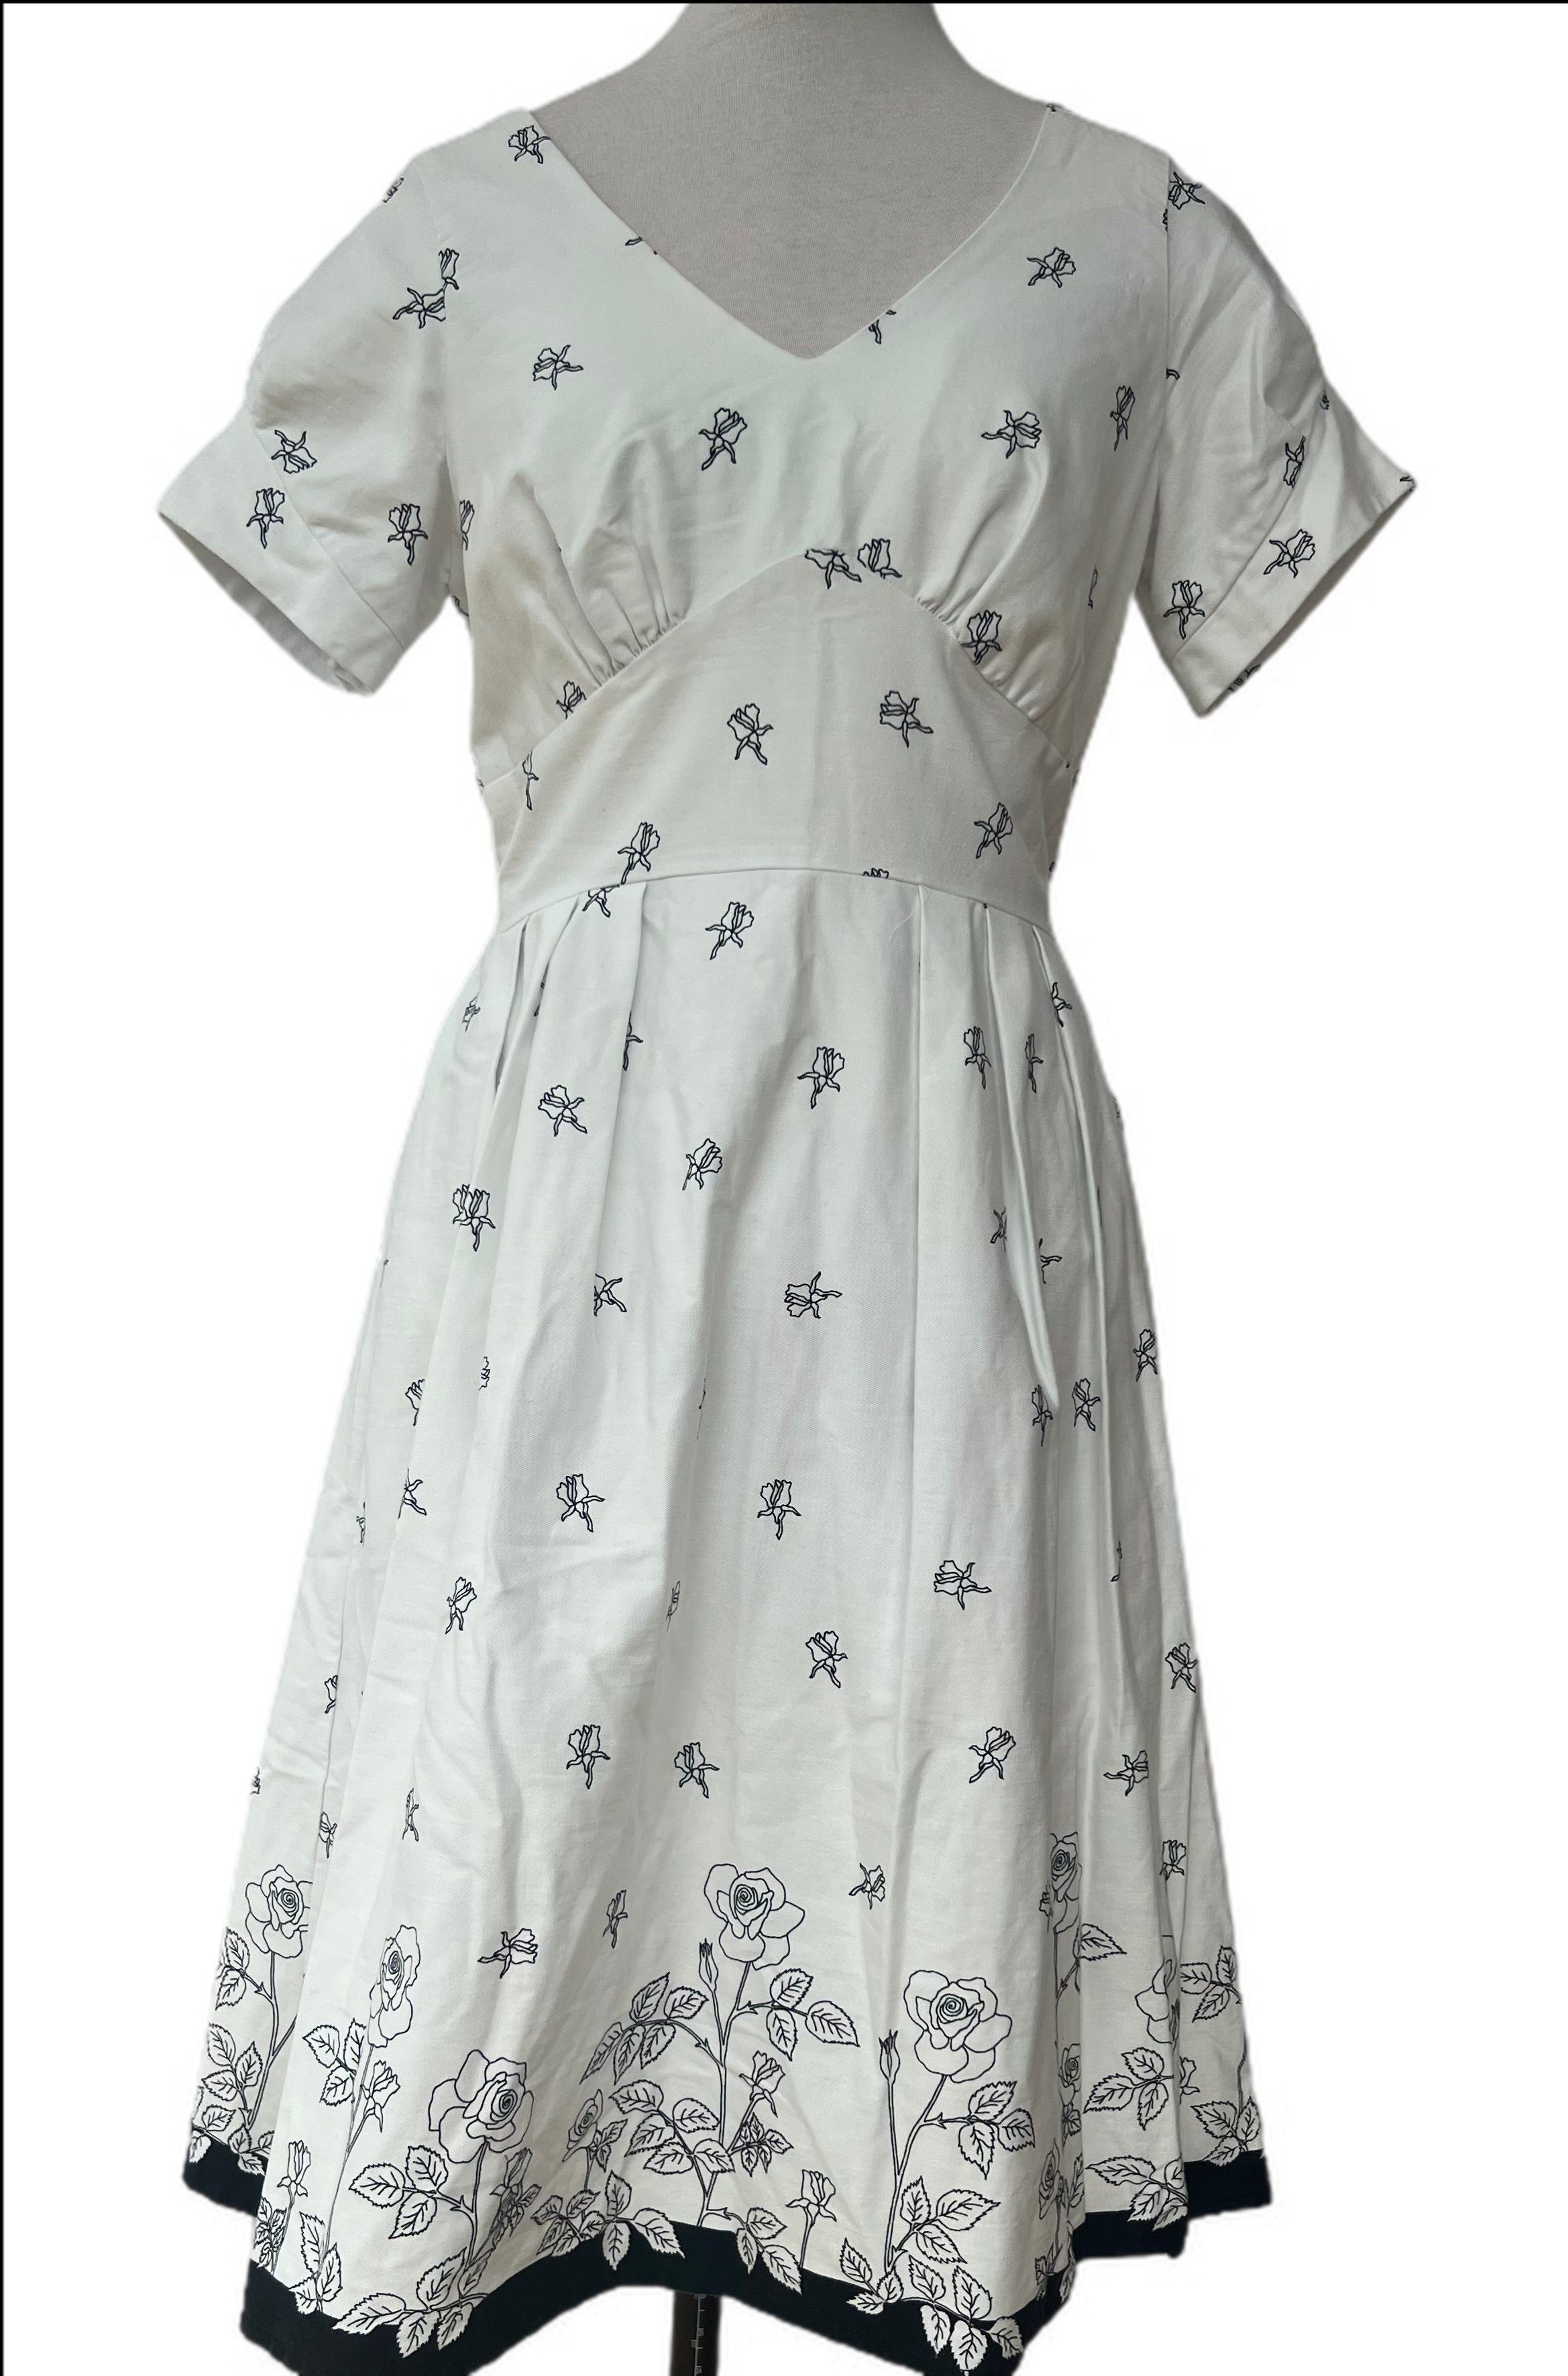 Gorgeous white apron style short sleeve dress with black flowers is made in England